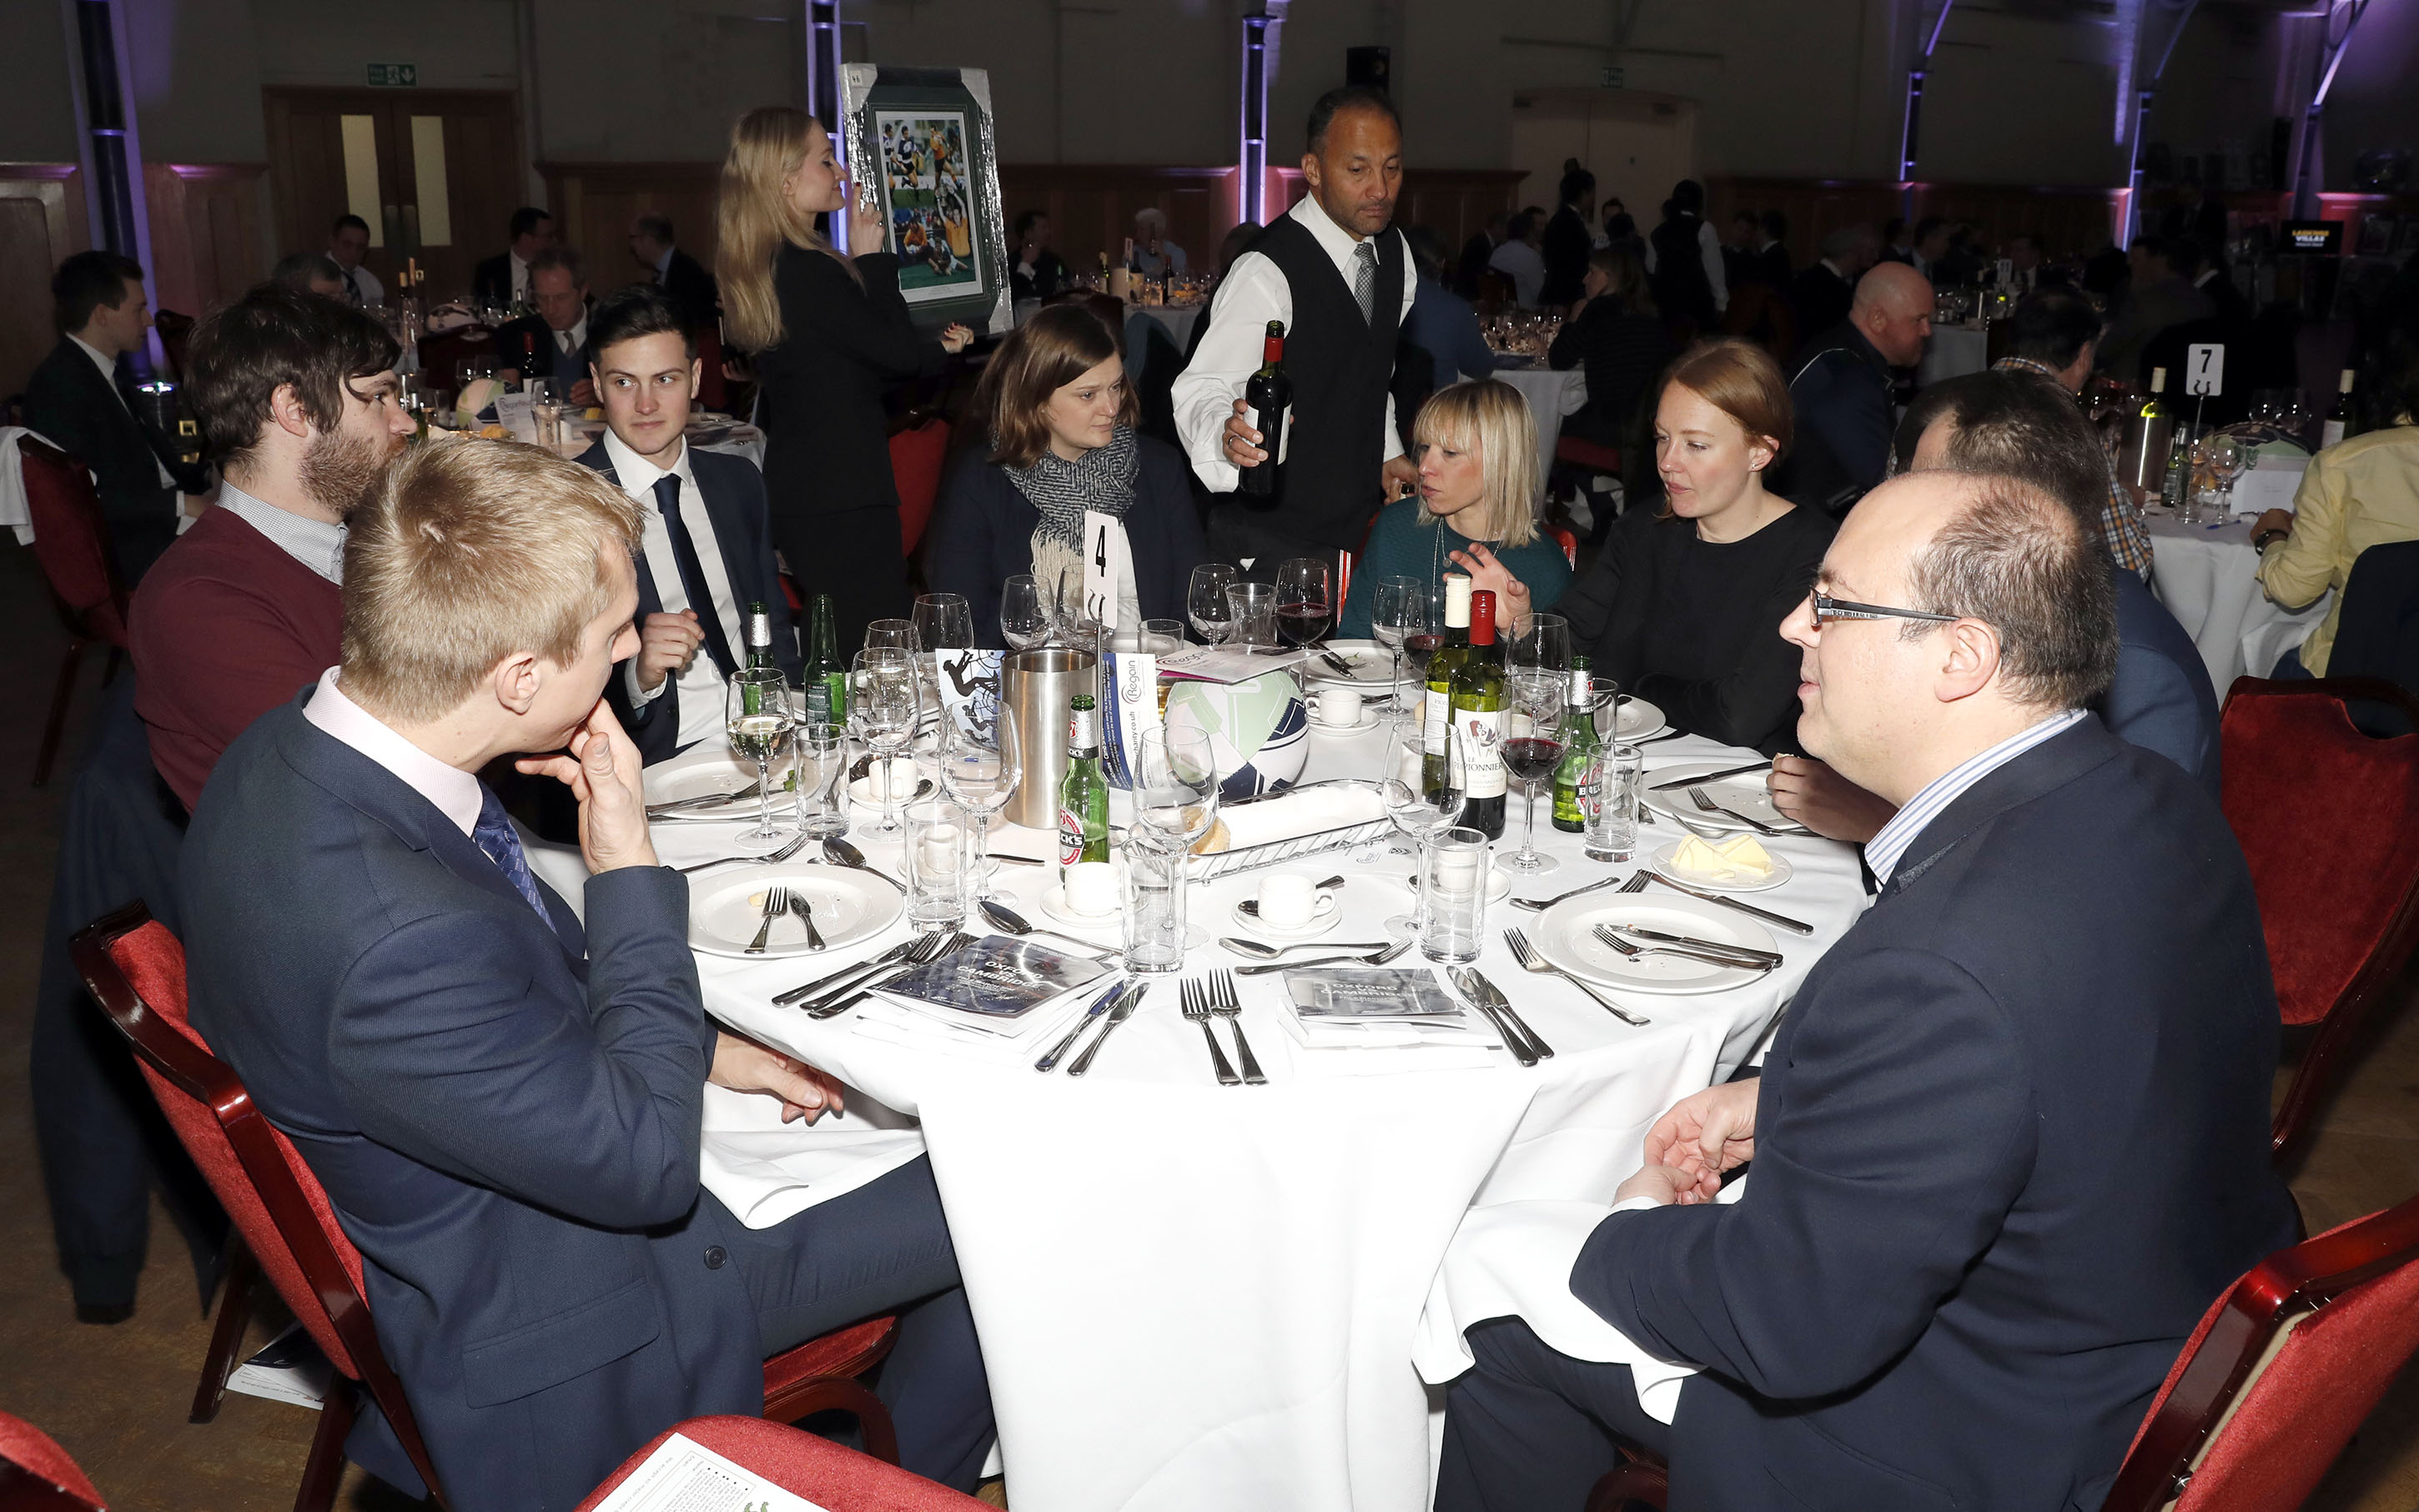 Hospitality tables during the RCMA Varsity Rugby League game between Cambridge University and Oxford University at the HAC Ground, Moorgate, London on Fri Mar 9, 2018